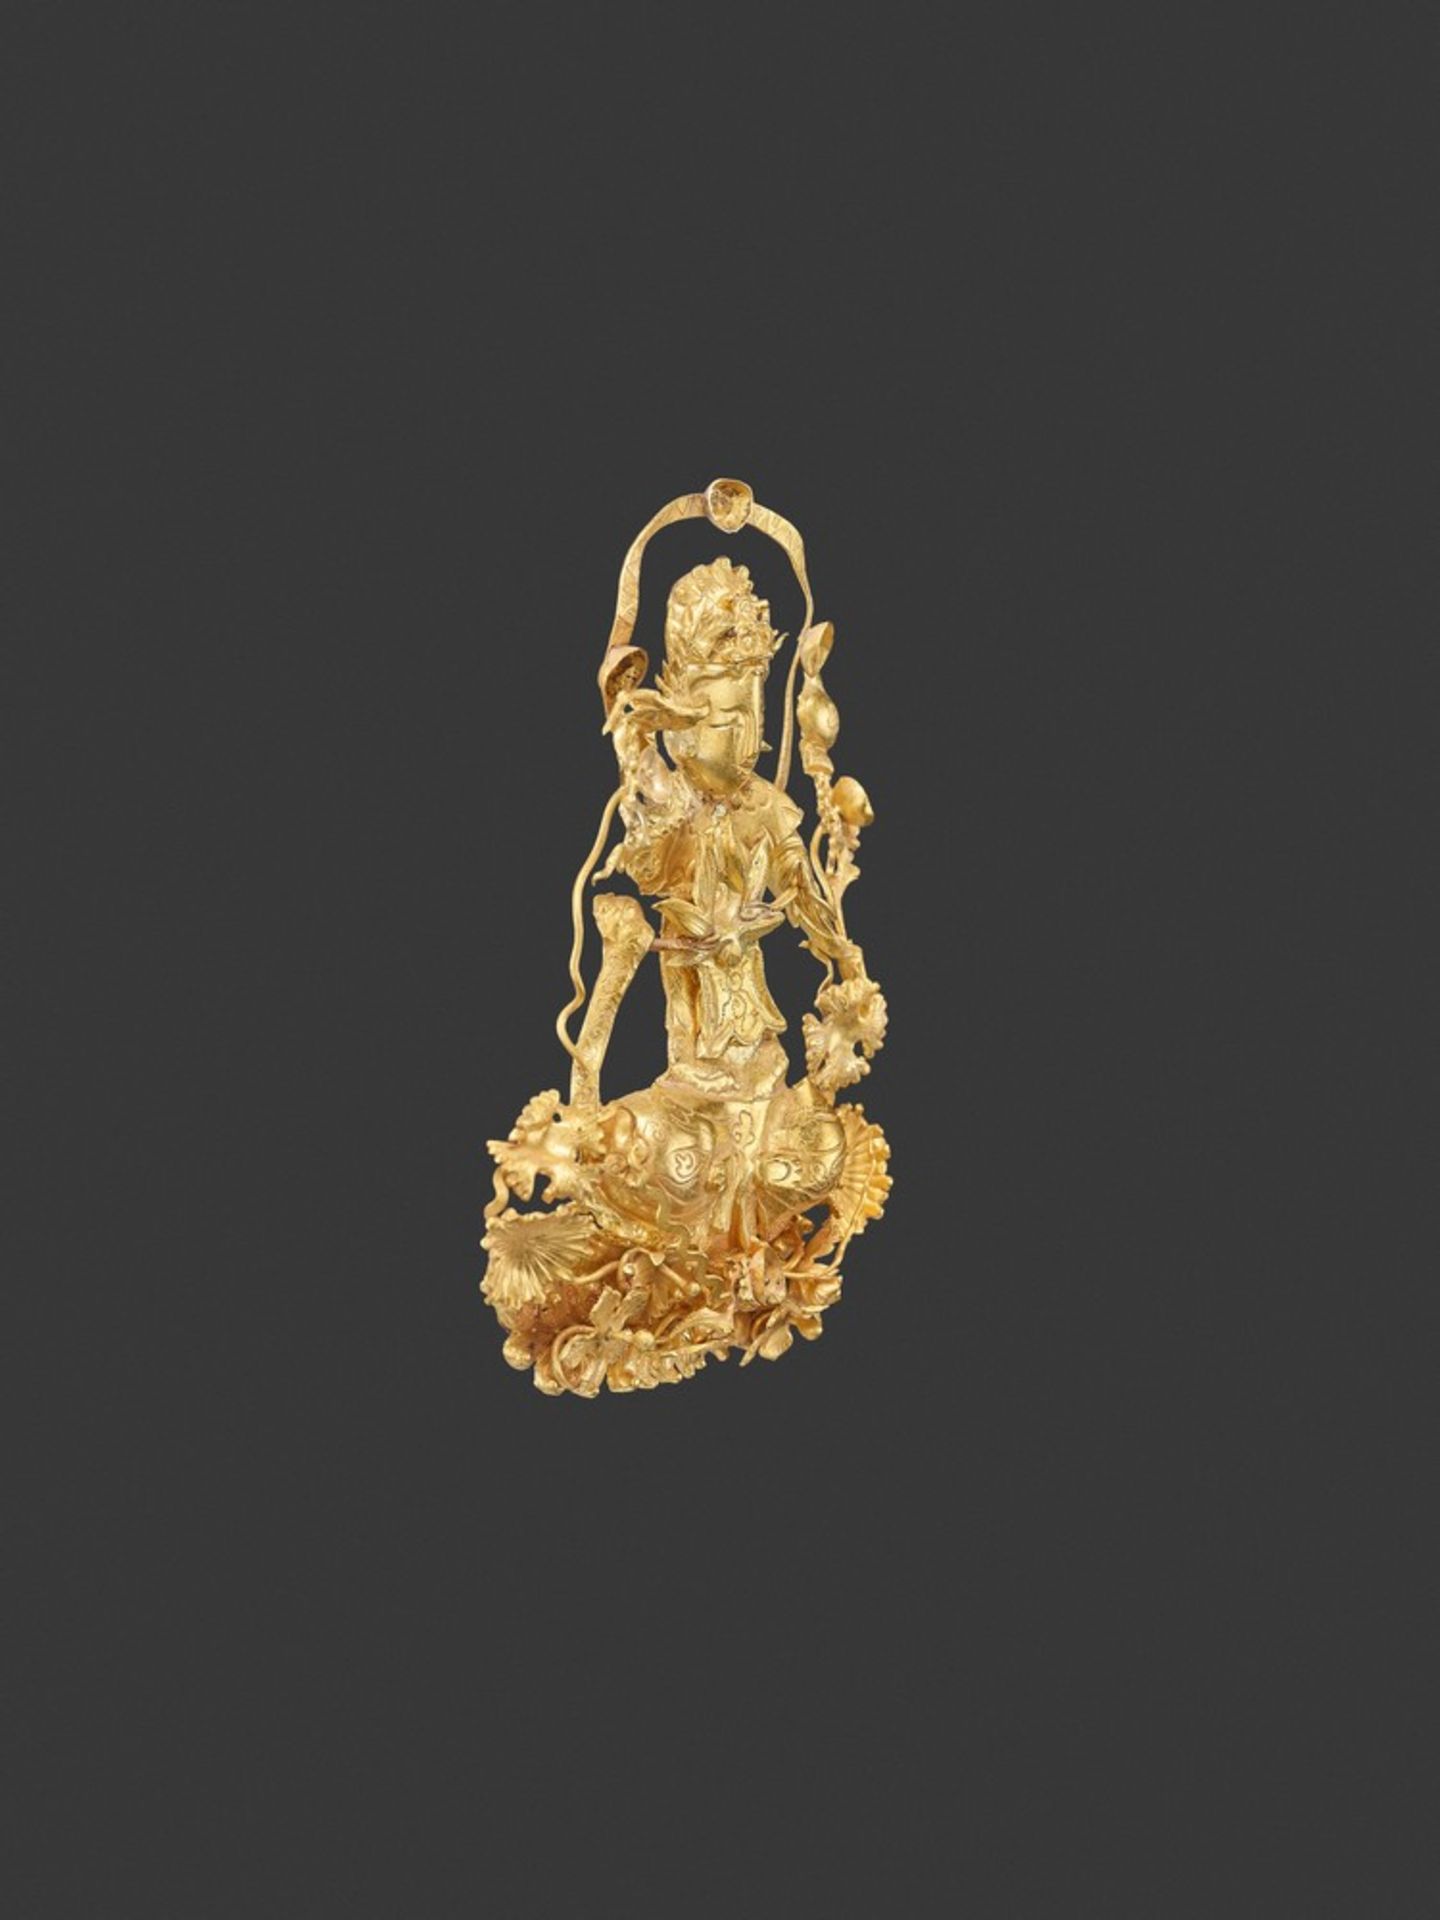 A LIAO DYNASTY GOLD REPOUSSÉ 'GUANYIN' FILIGREE ORNAMENT China, 916-1125. The Goddess of Mercy - Image 3 of 9